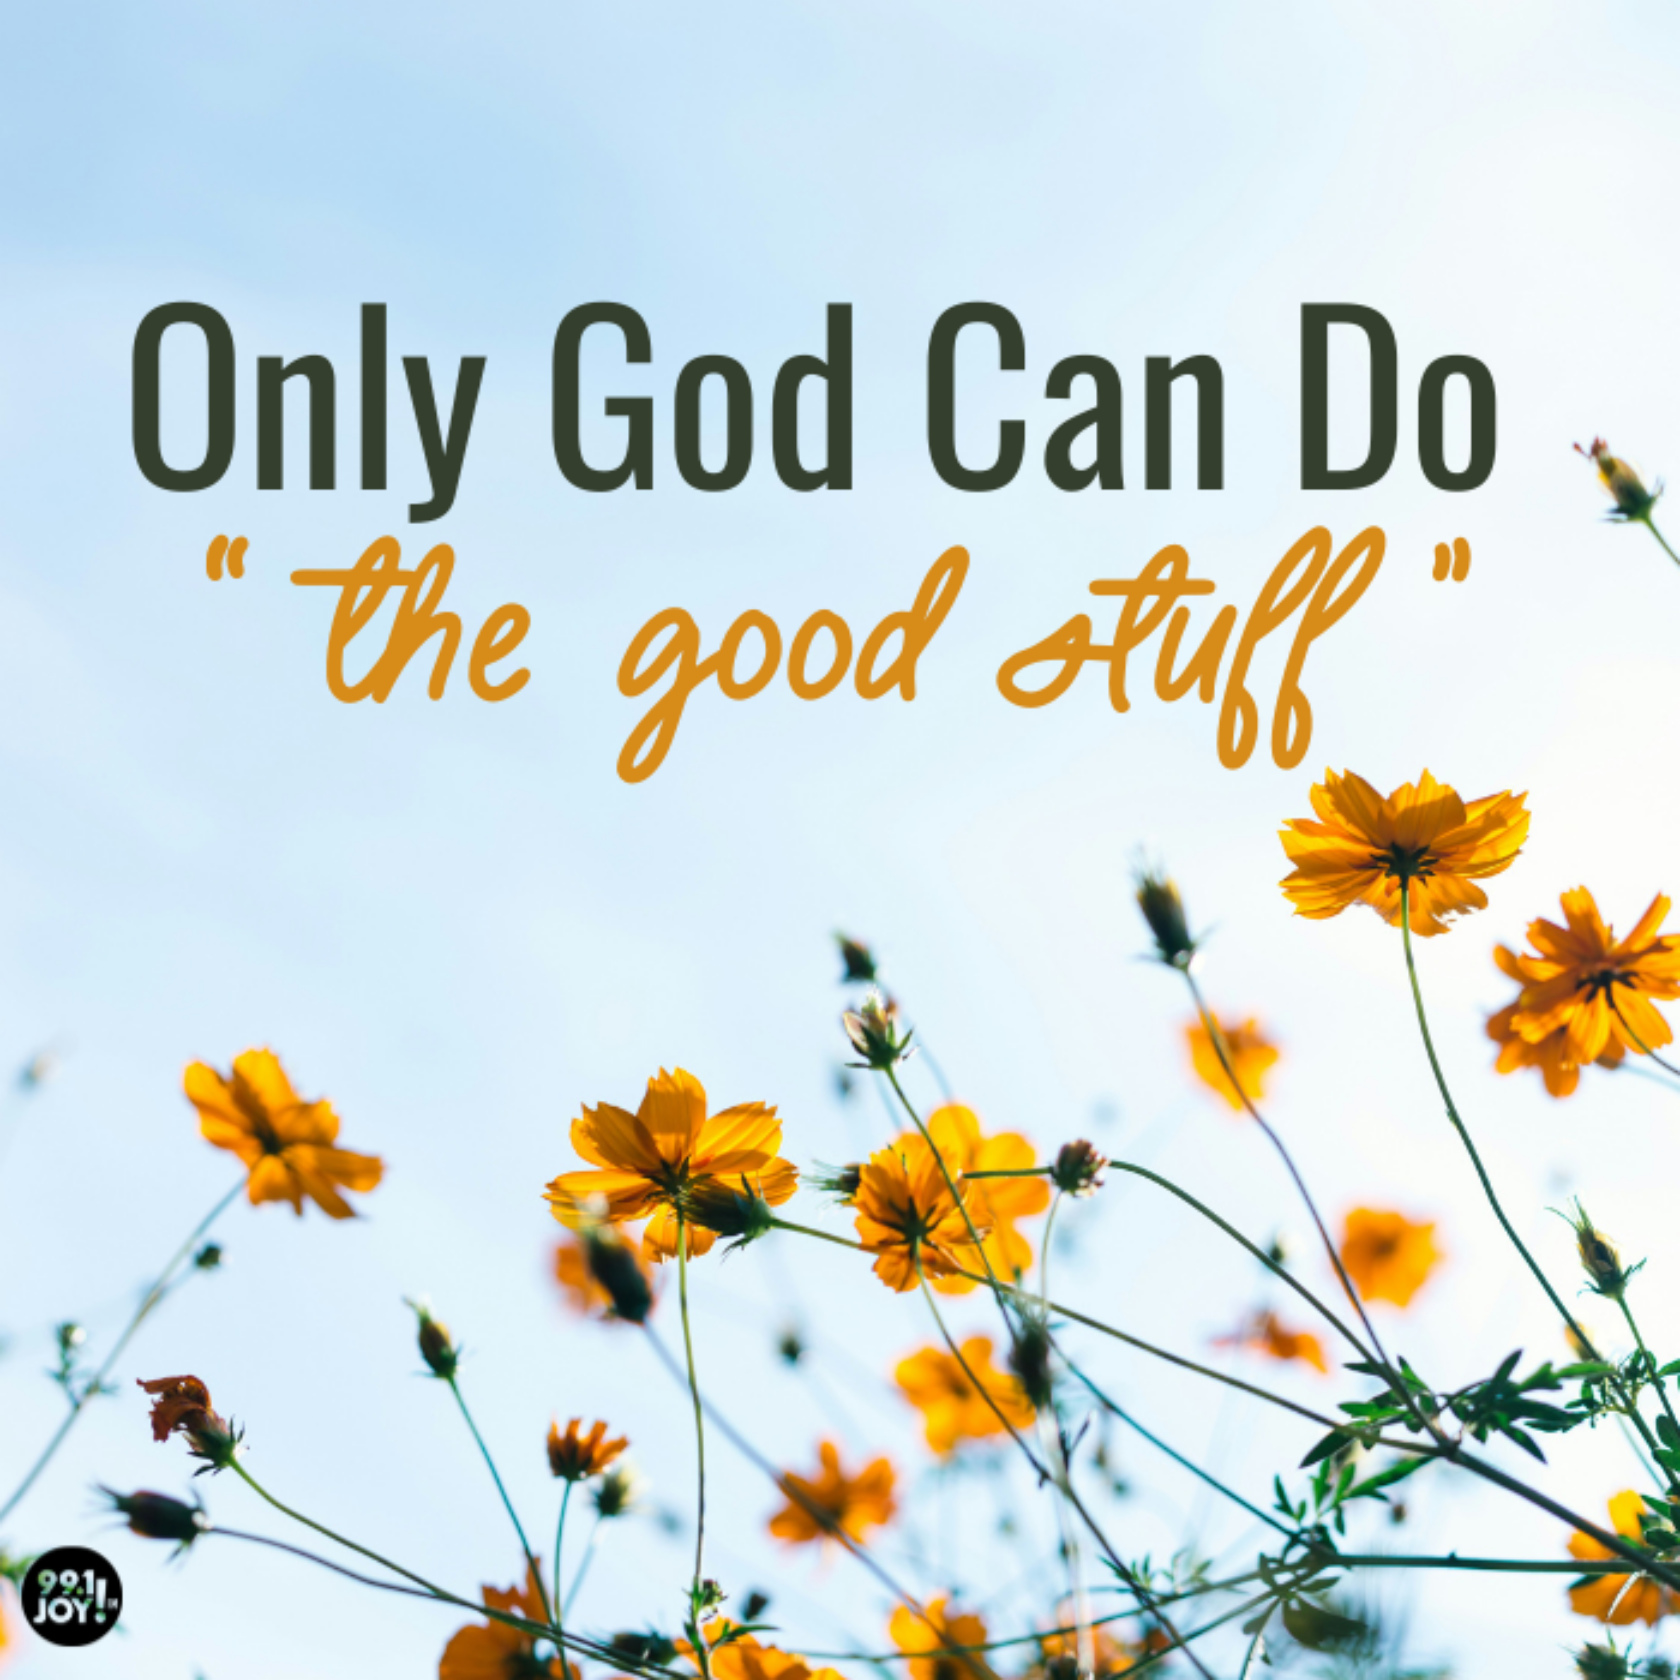 Only God Can Do “The Good Stuff”